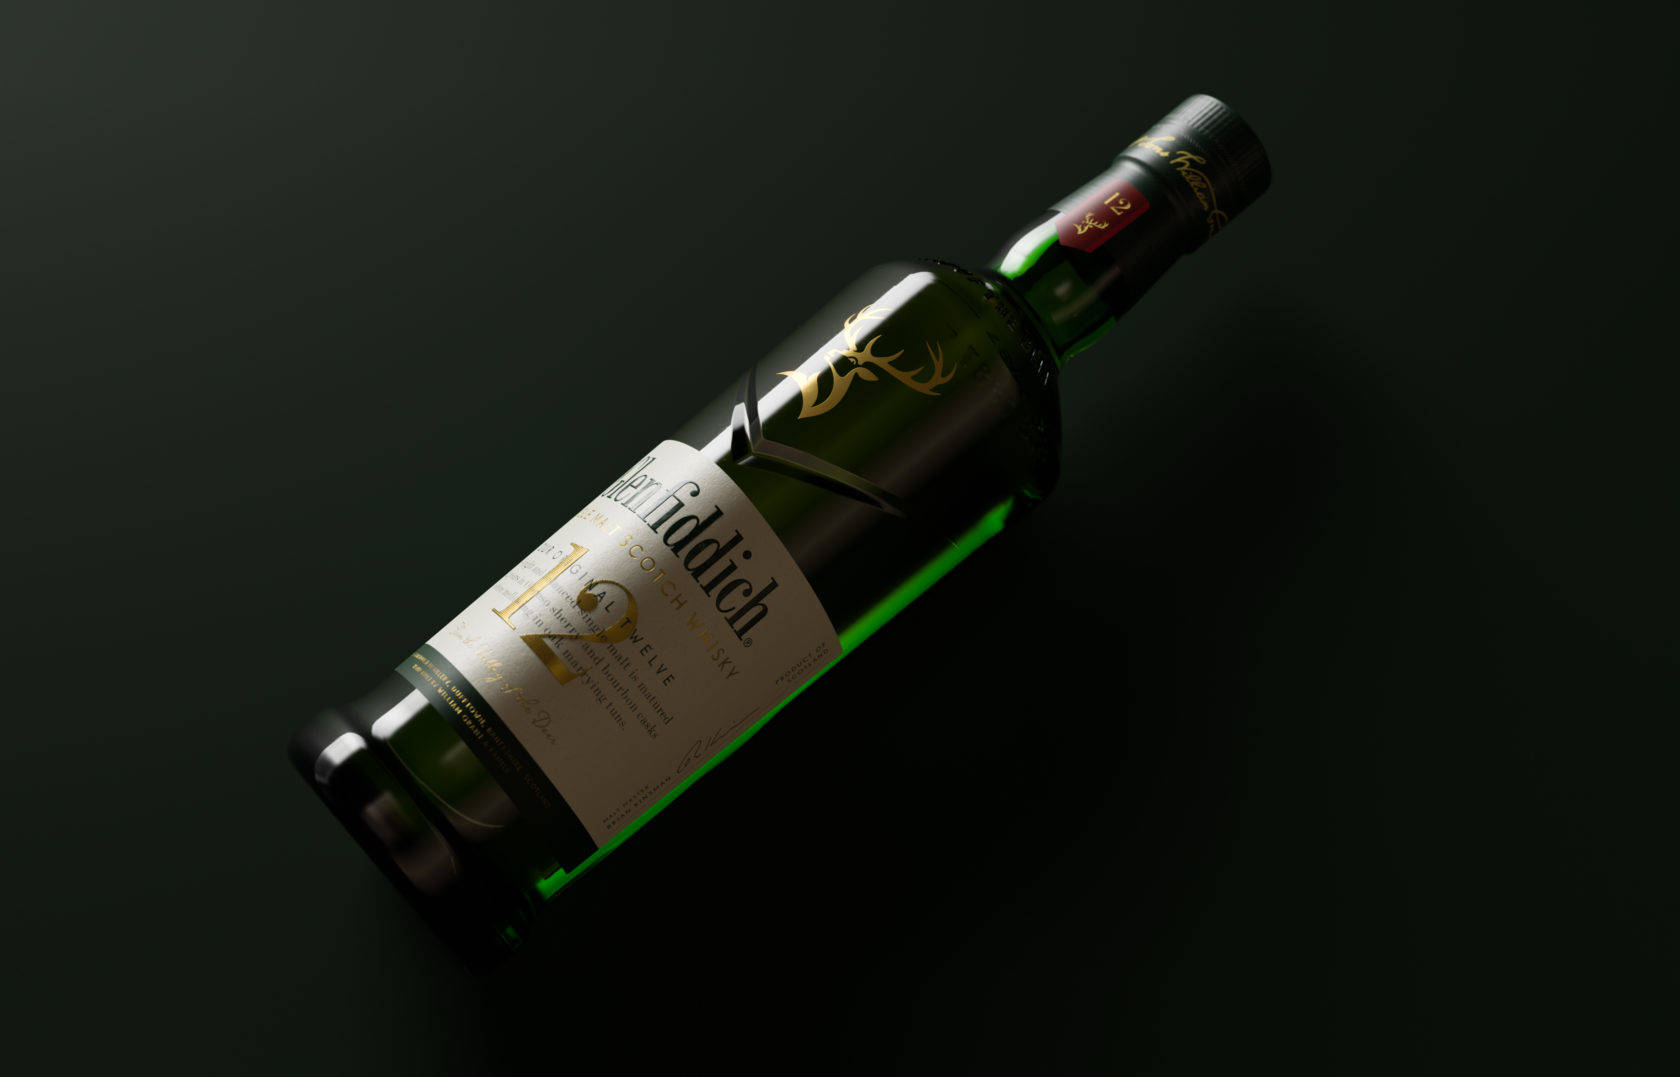 Luxury Taste with Glenfiddich 12 Year Old Scotch Whisky Wallpaper